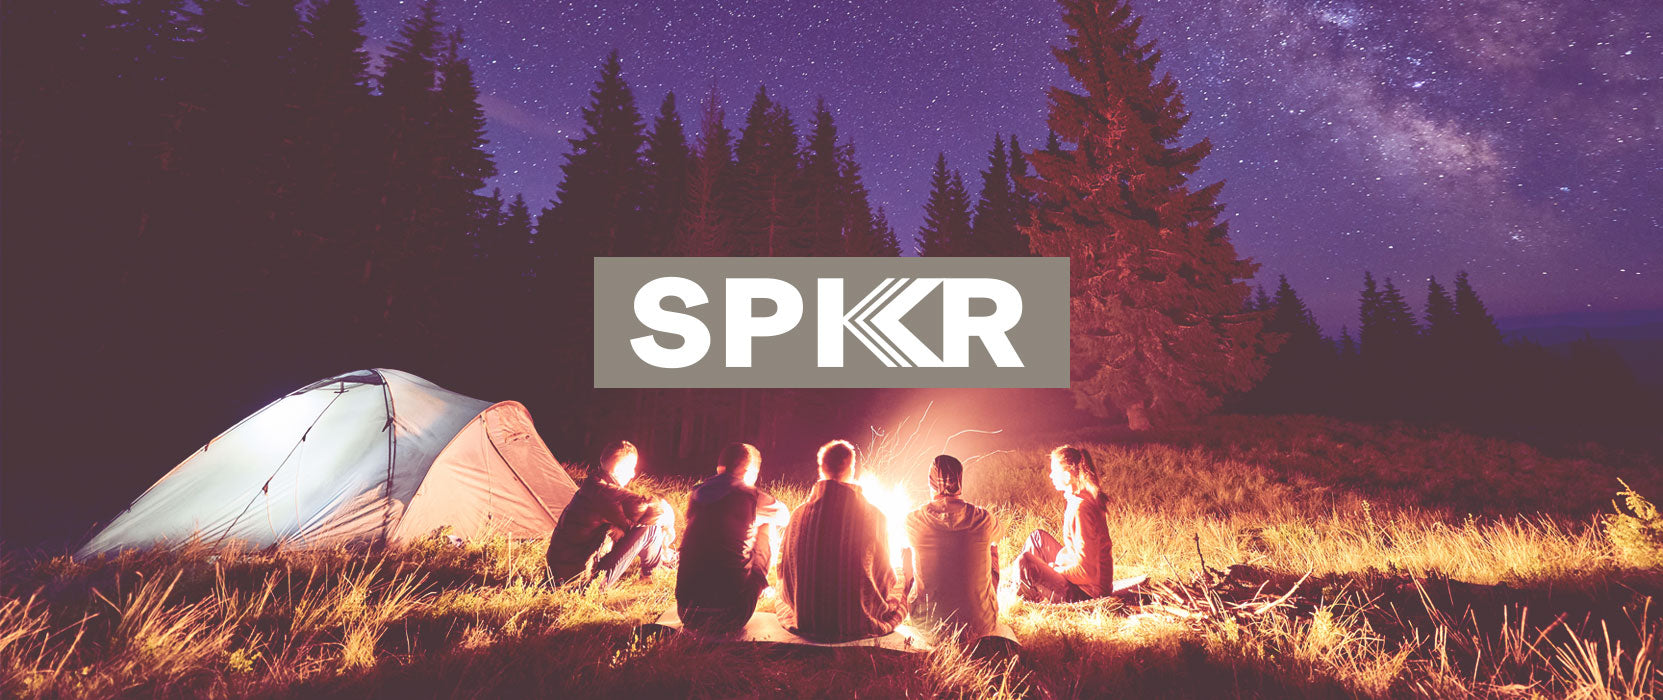 A group of friends sitting around a campfire near a tent under a starry sky in a forest, with the word "spkr" superimposed in the center.